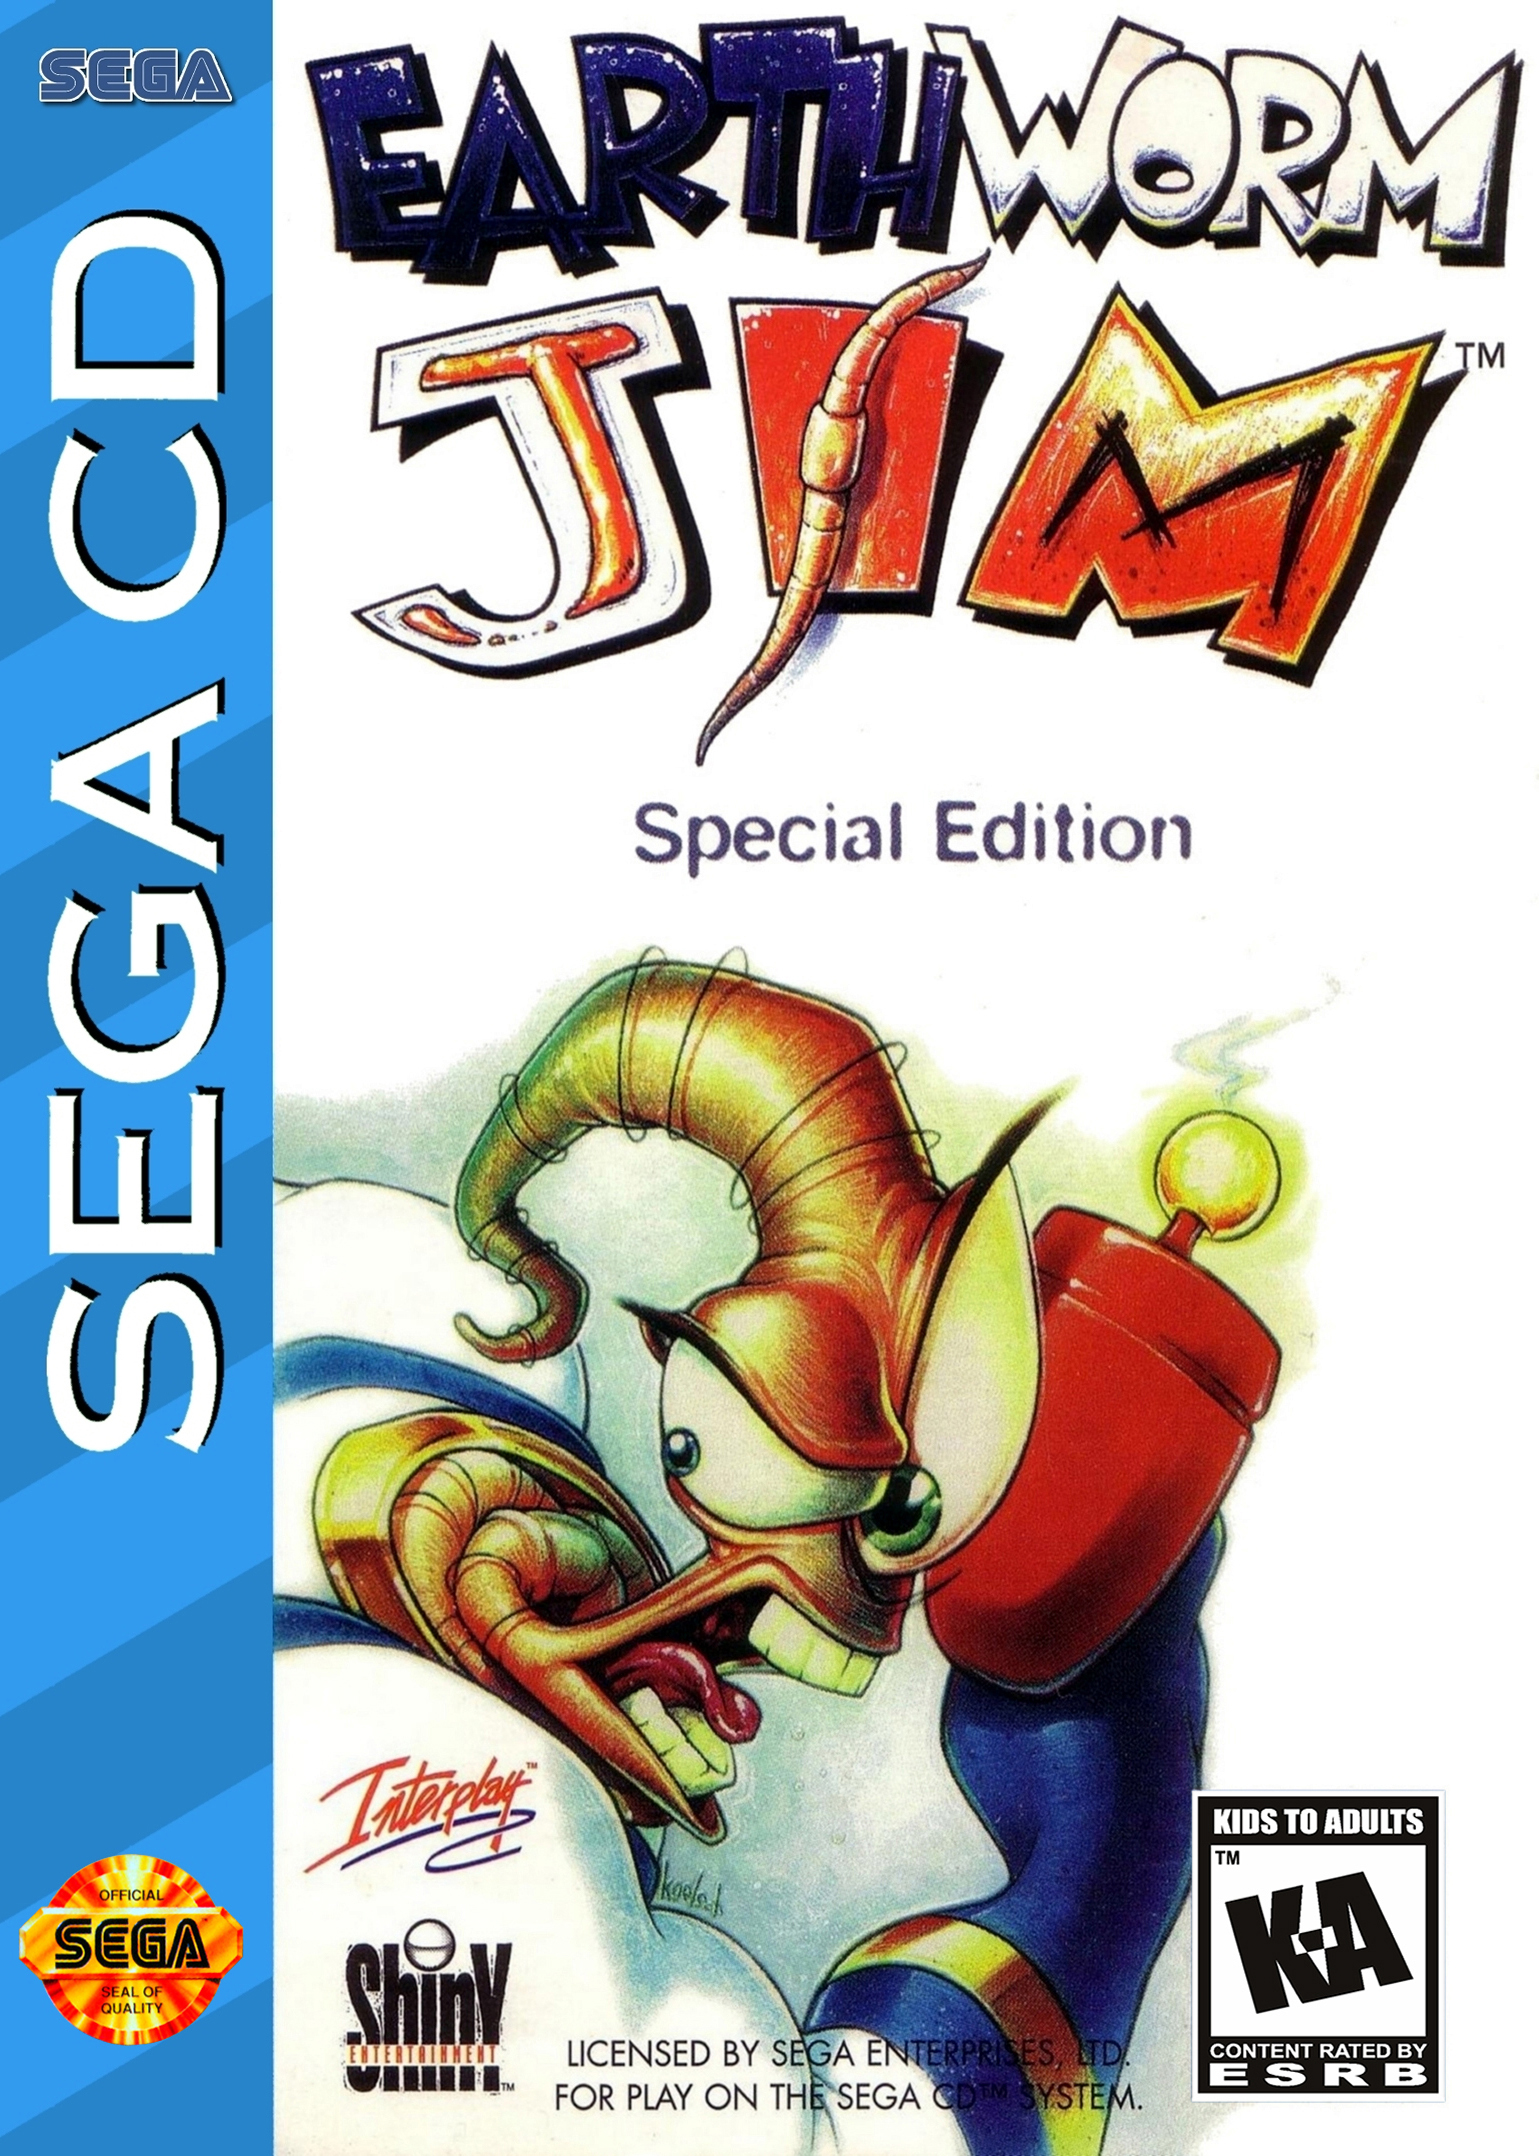 TGDB - Browse - Game - Earthworm Jim: Special Edition